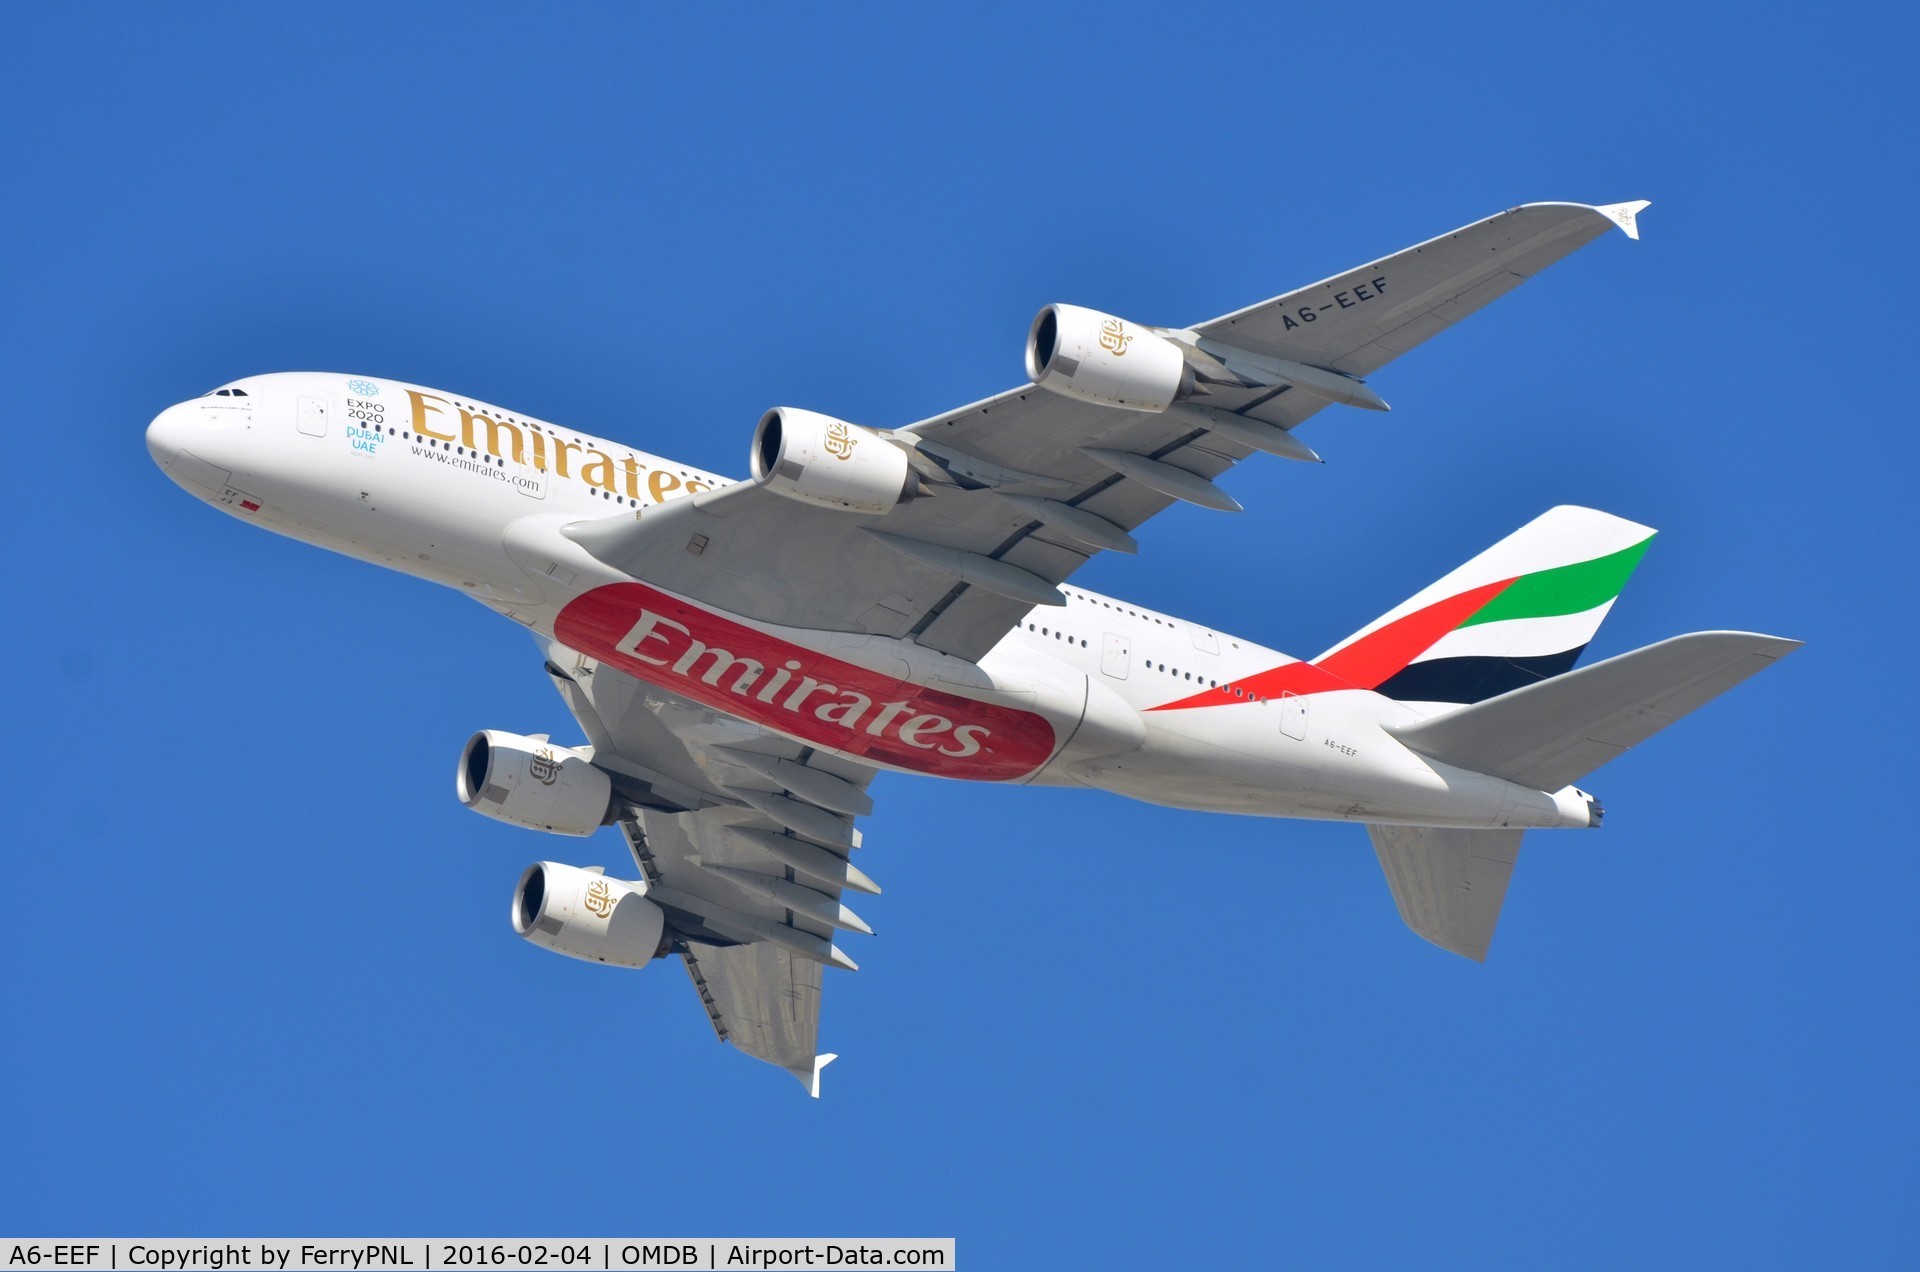 A6-EEF, 2012 Airbus A380-861 C/N 113, Emirates A388